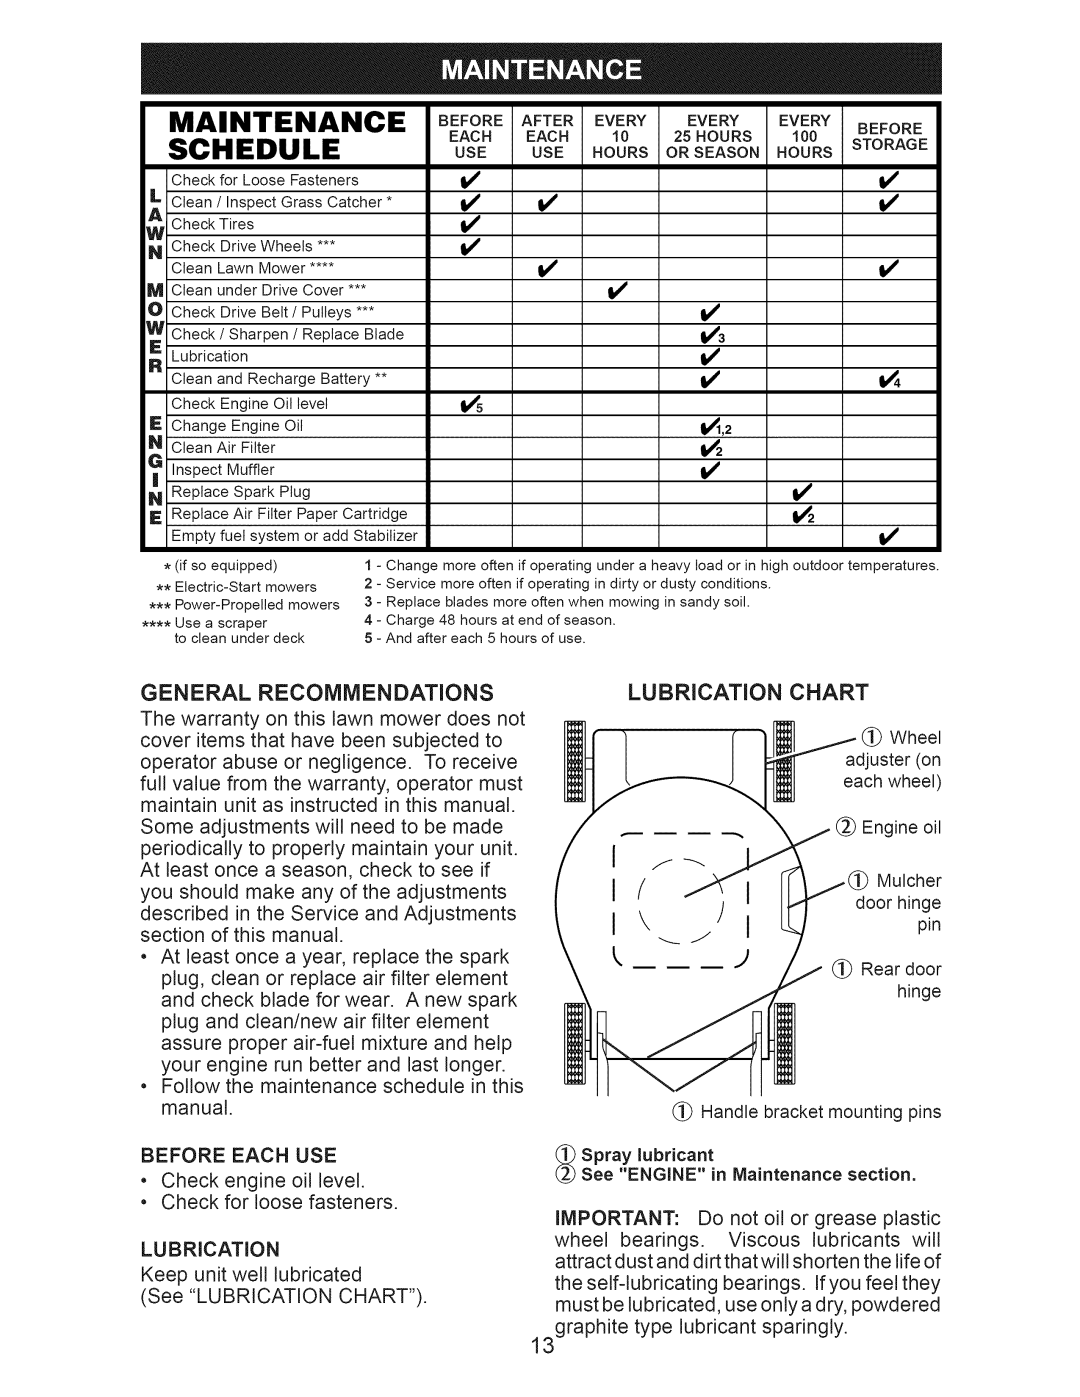 Craftsman 917.376530 owner manual Maintenance, Schedule, Use Hours 